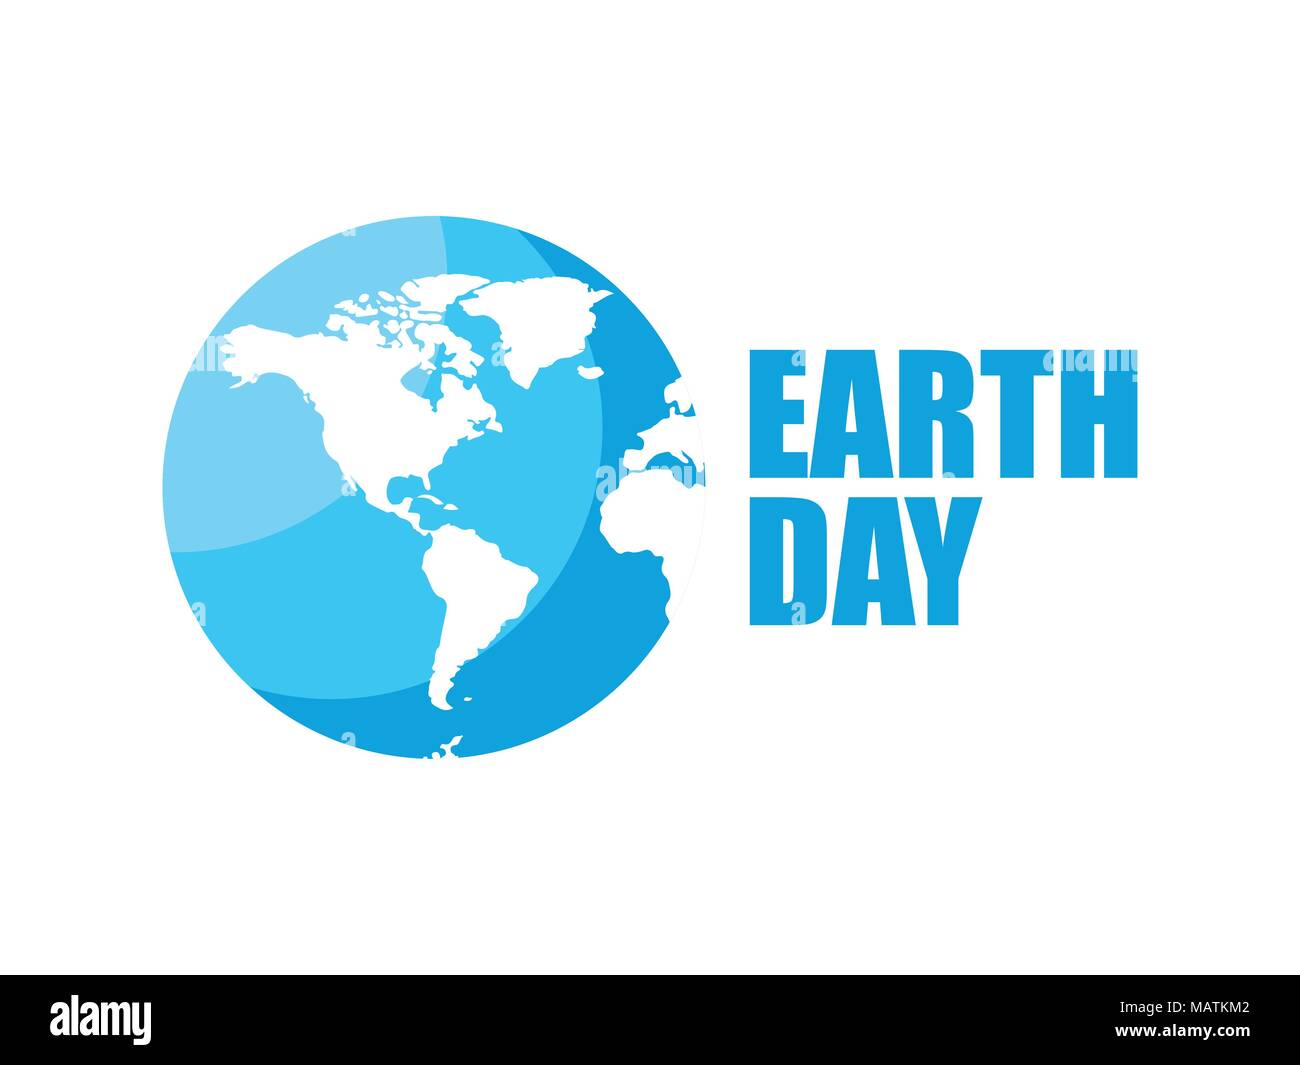 Earth Day Logo Design 22 April Blue And White Color Vector Illustration Stock Vector Image 